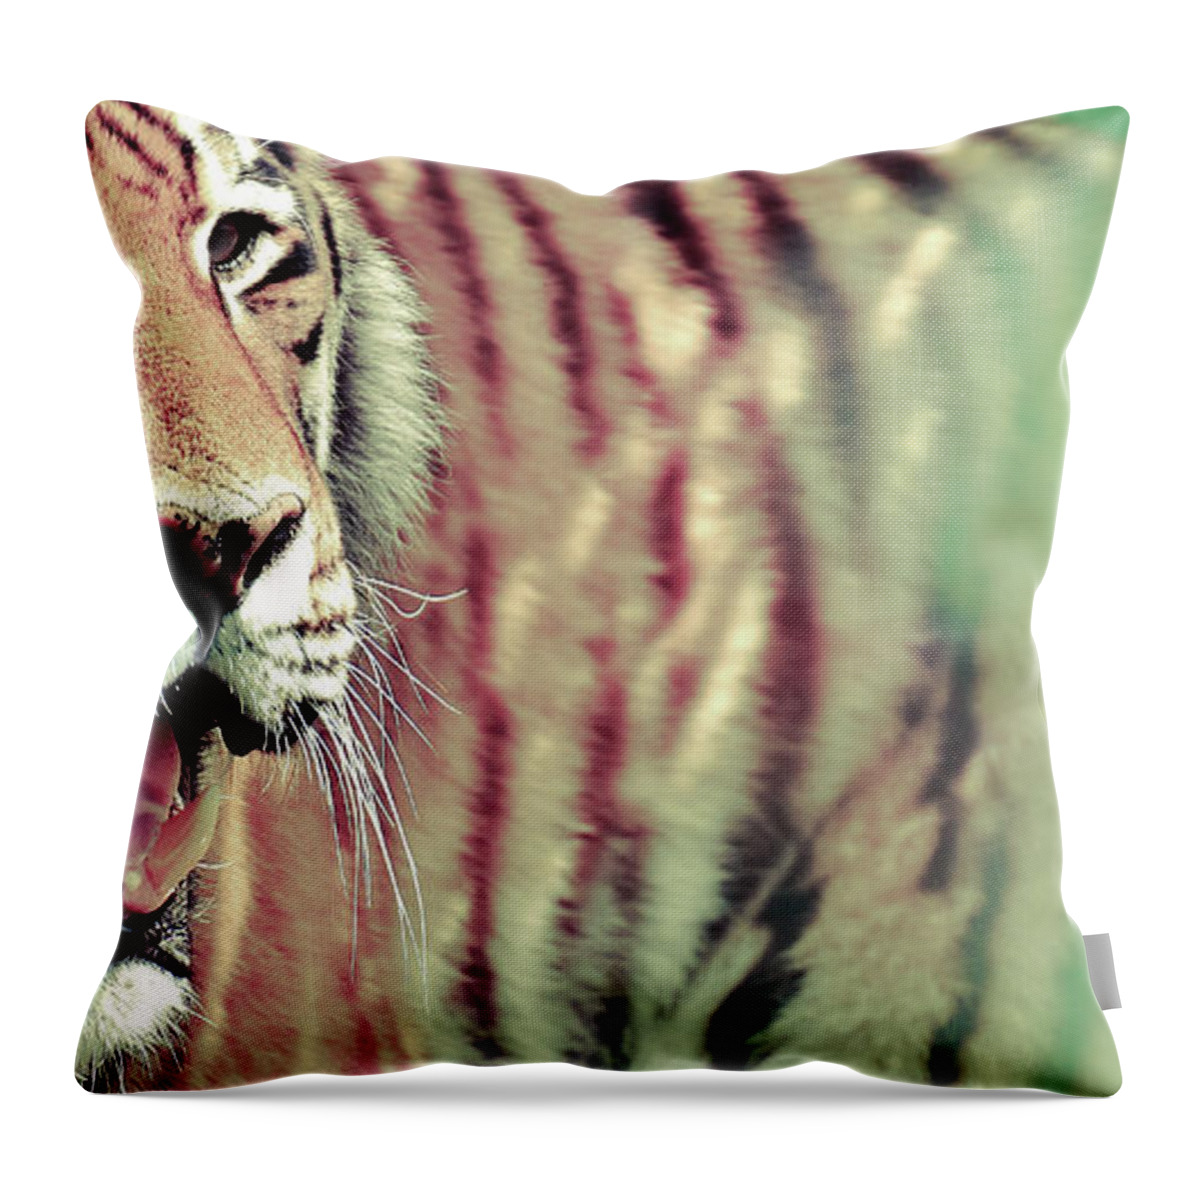 Tiger Throw Pillow featuring the photograph Colorfull Artistic Tiger Photo Art by Wall Art Prints